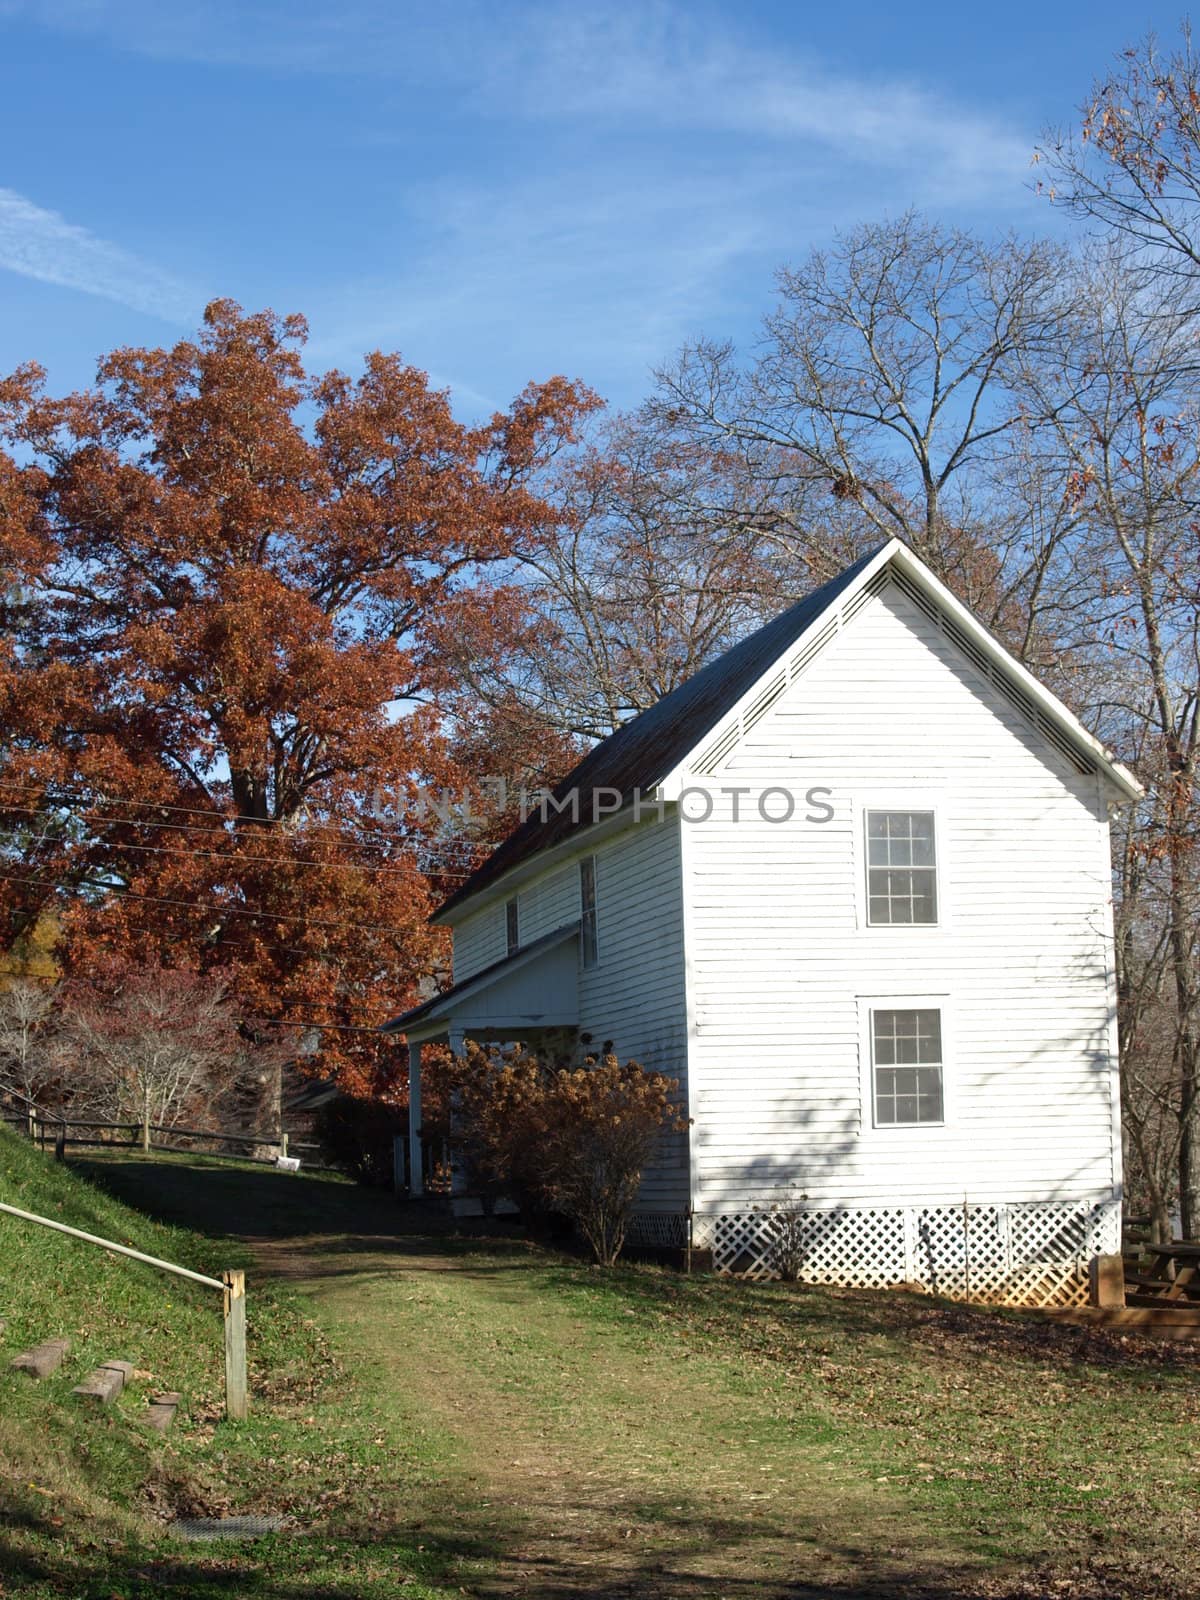 old farm house by northwoodsphoto